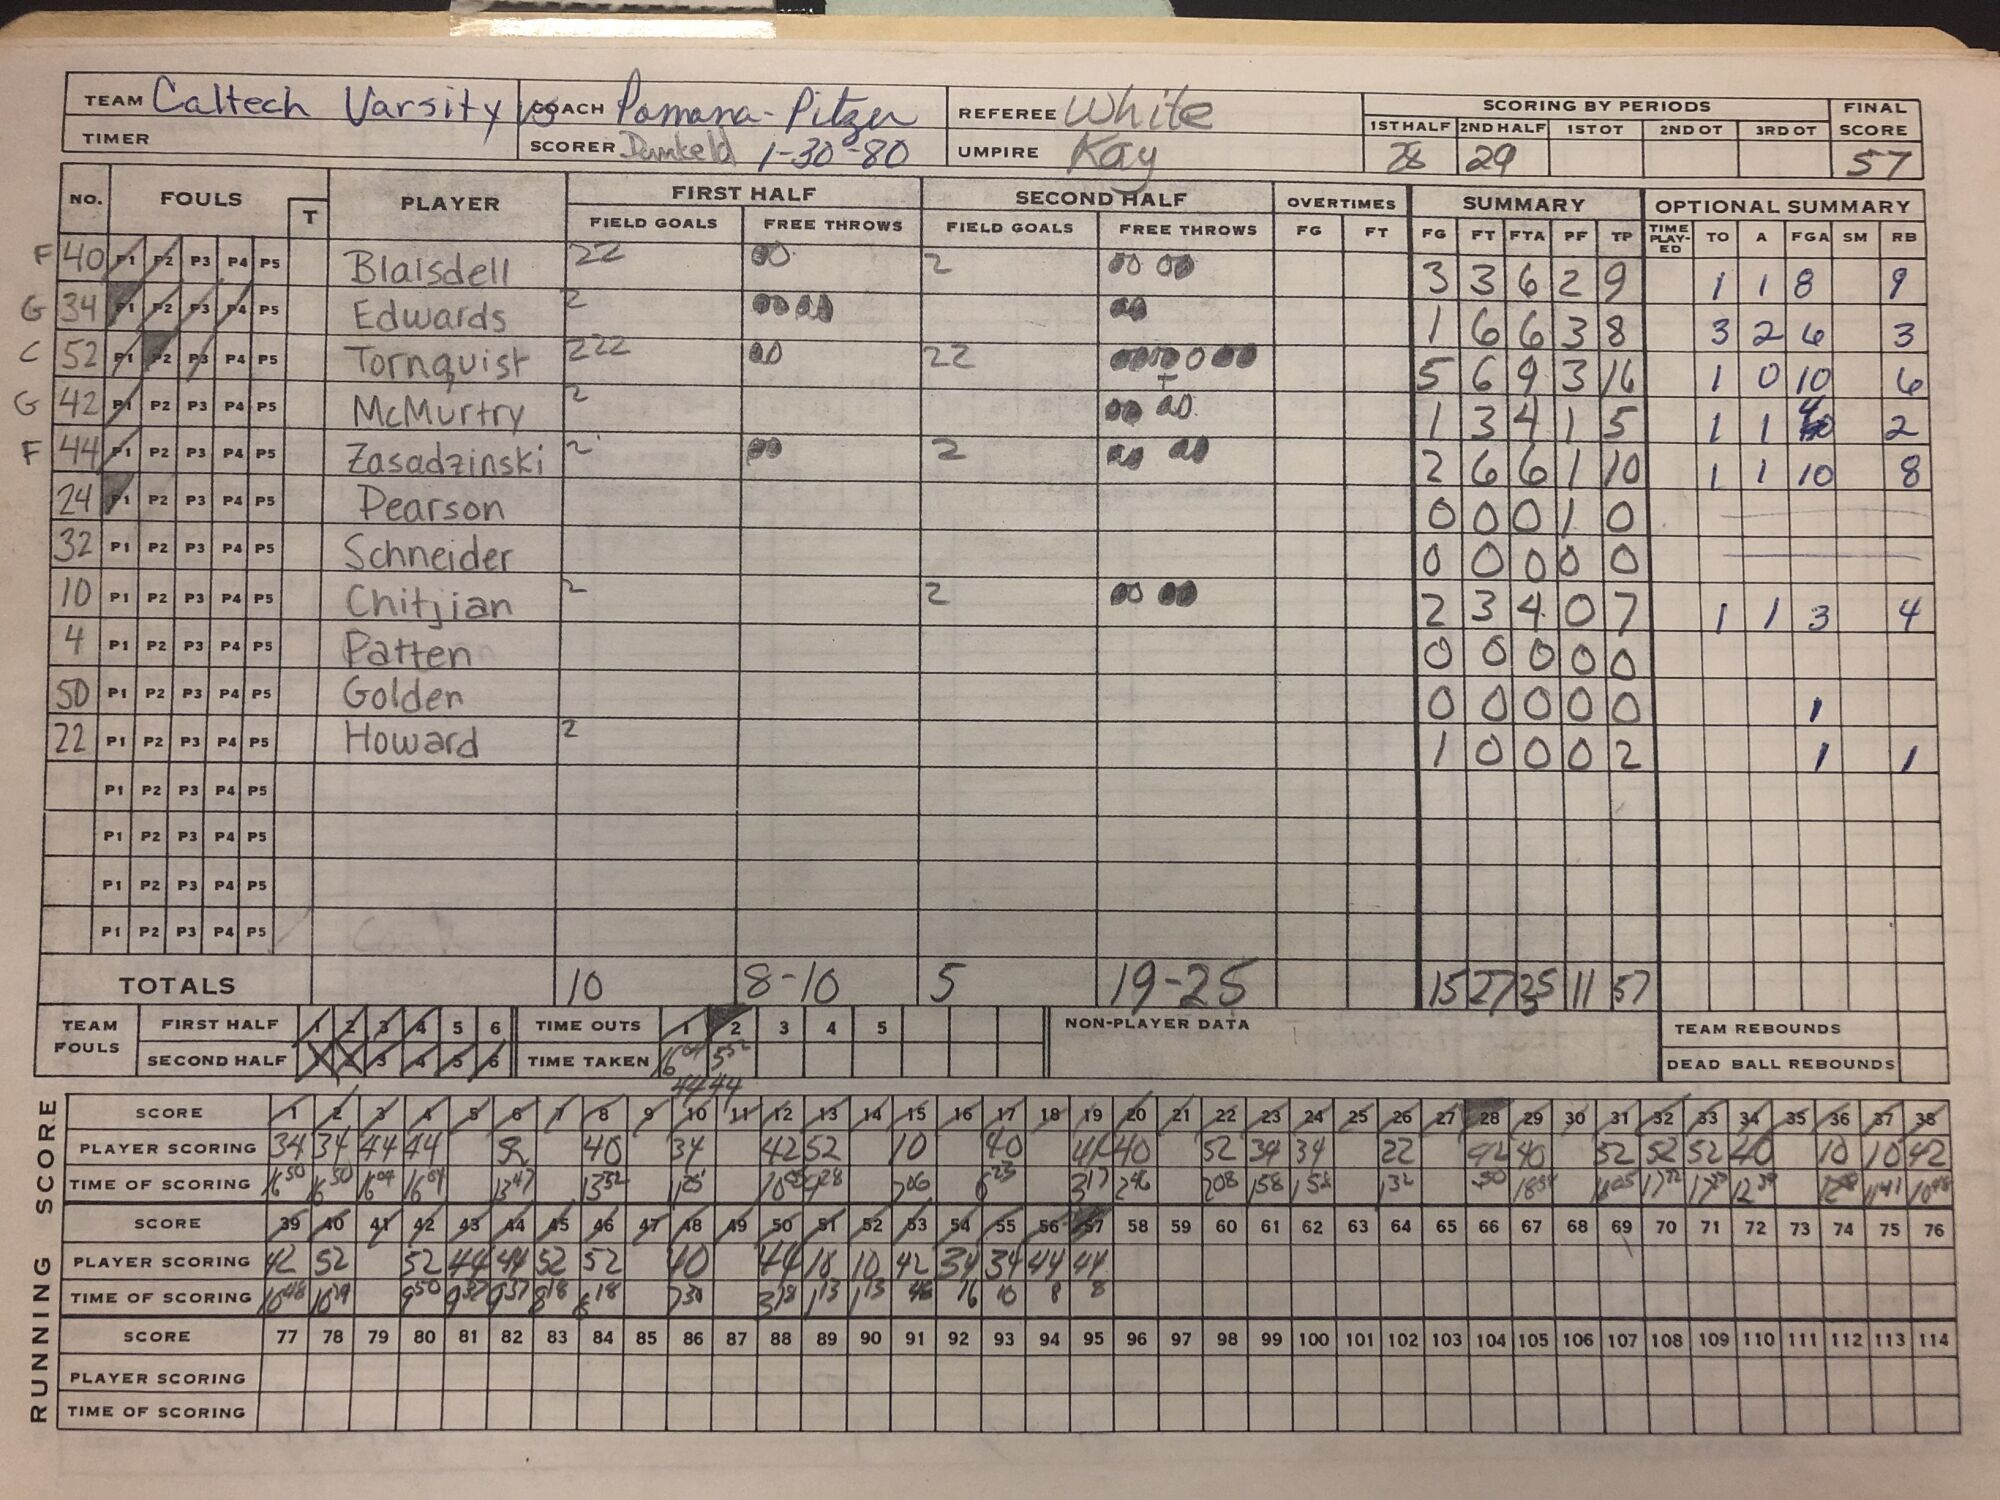 The scorebook for Caltech from a Jan. 30, 1980, basketball game against Pomona-Pitzer.